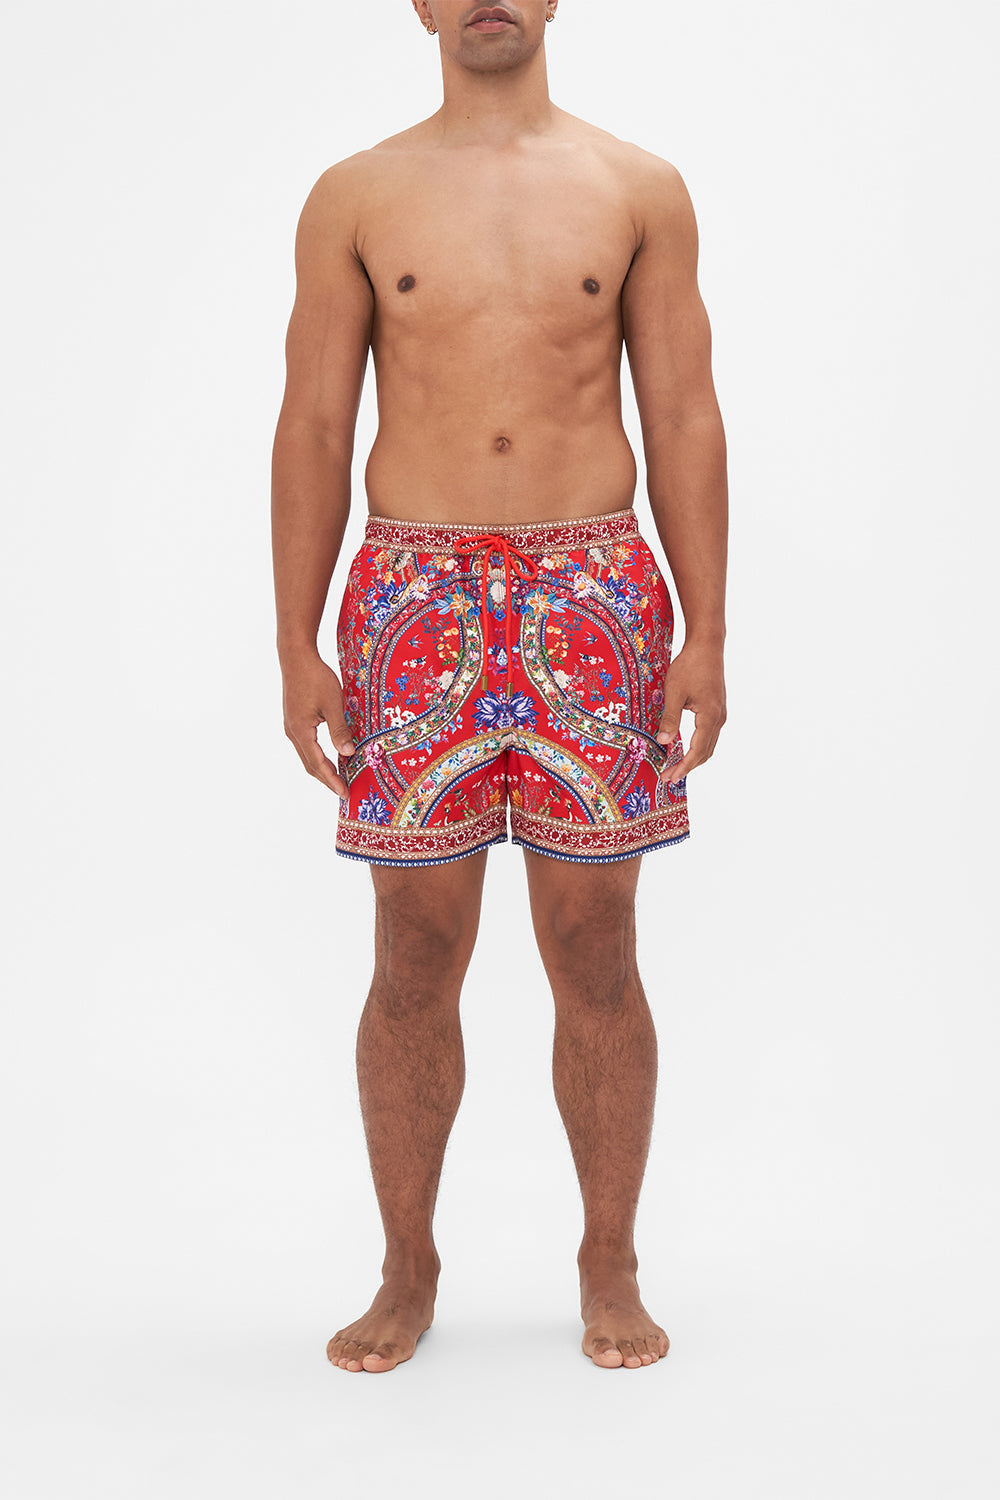 Hotel Franks by CAMILLA mens red floral print boardshorts in The Summer Palace print